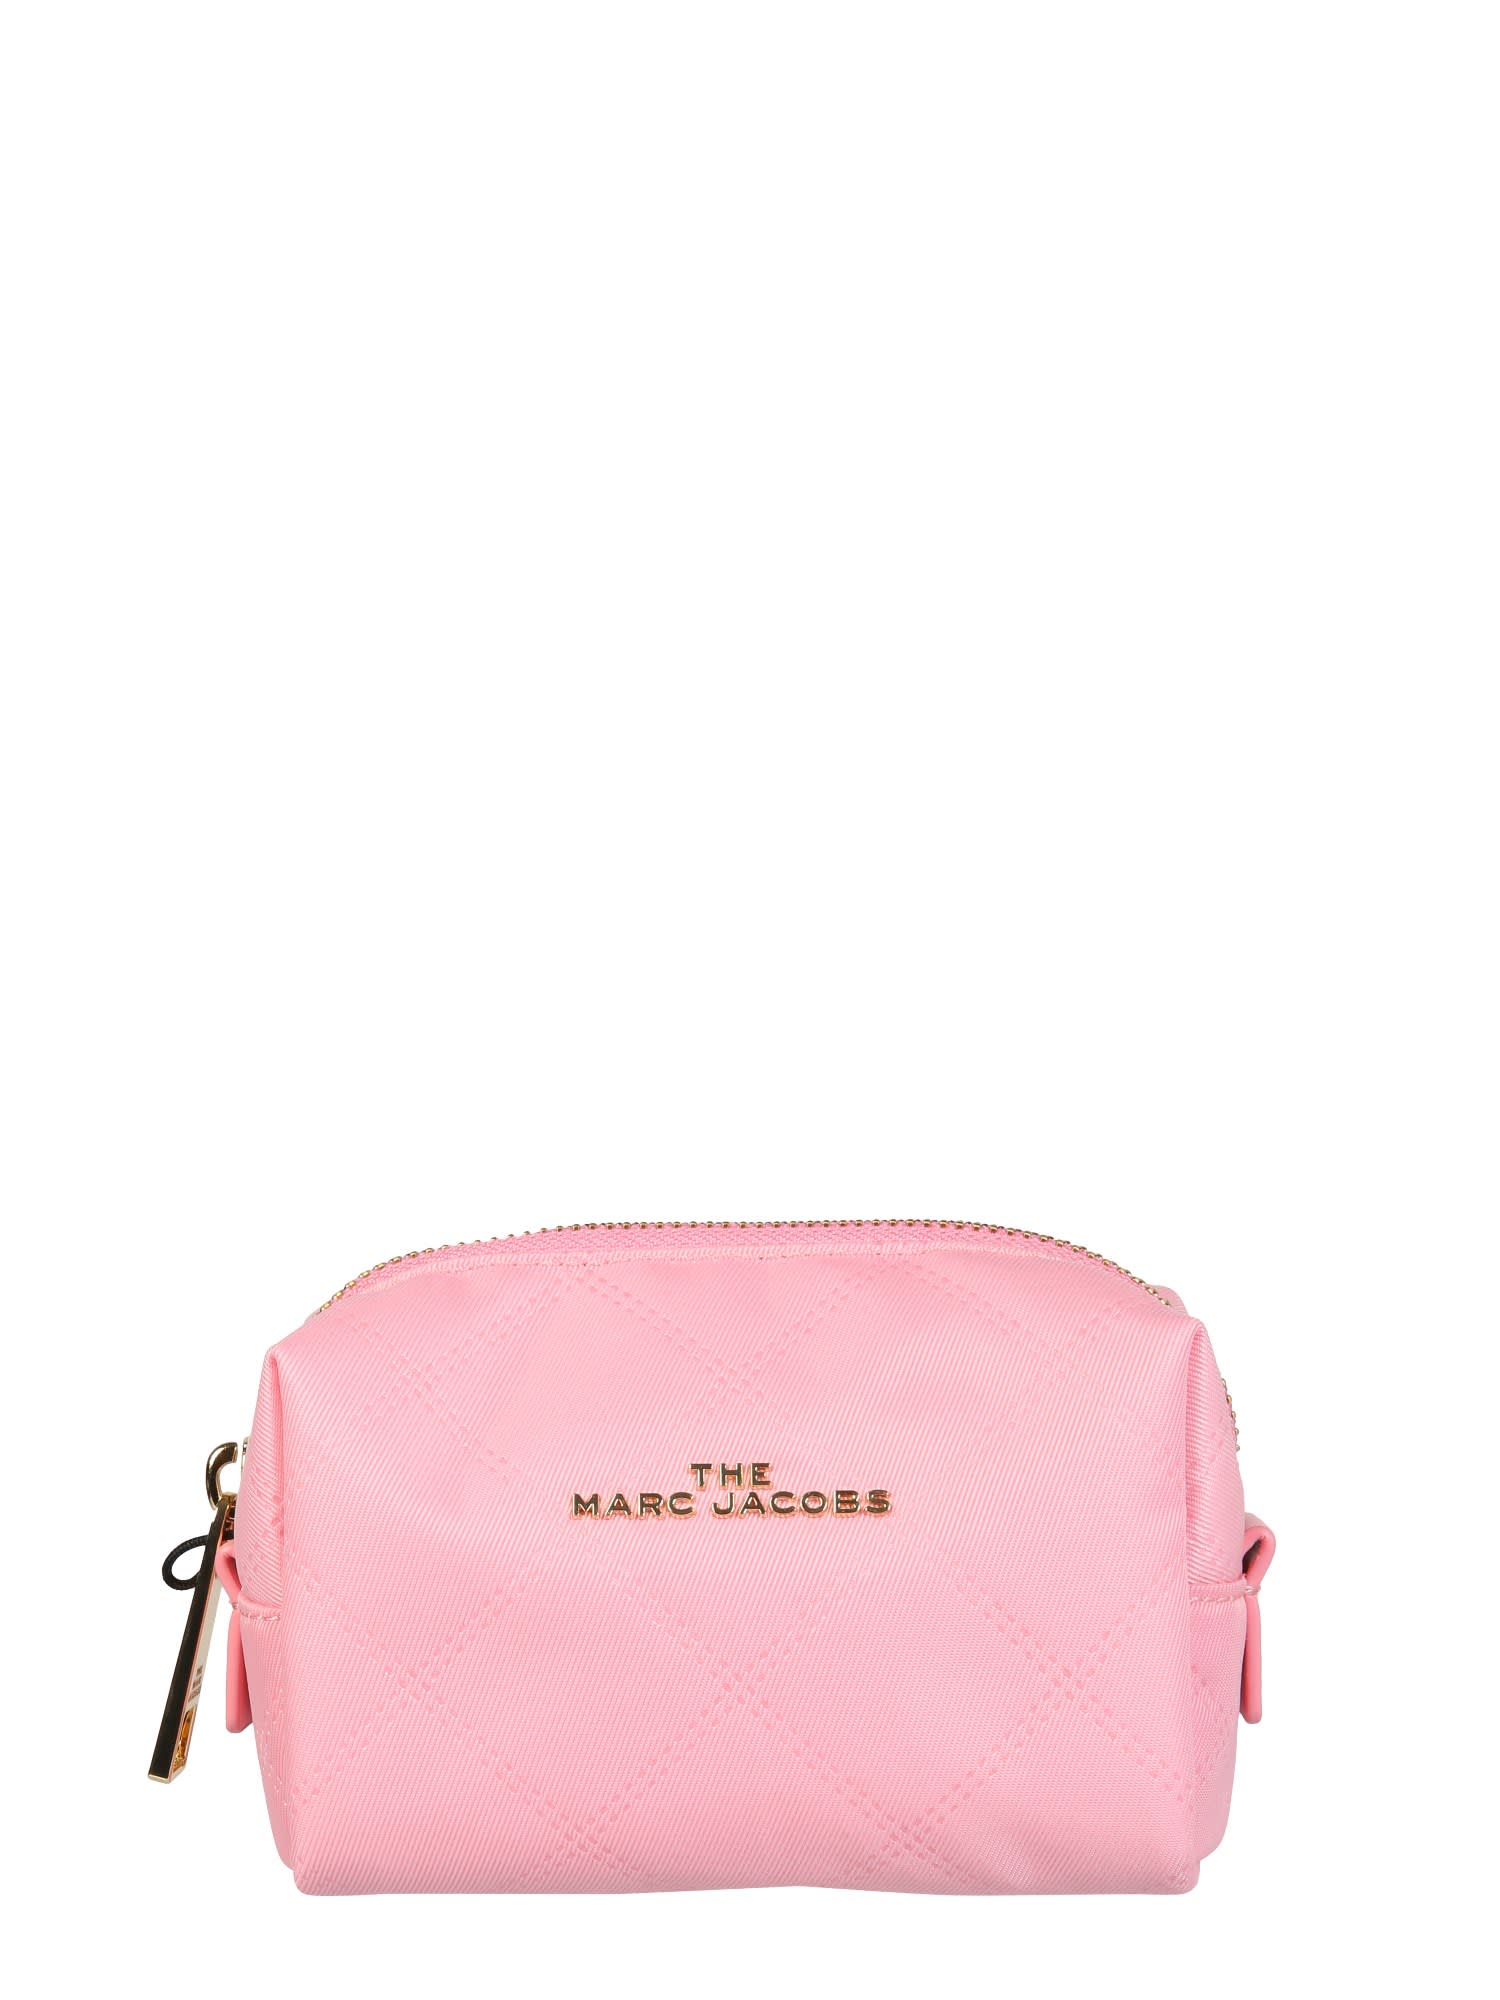 Marc Jacobs The Beauty Pouch